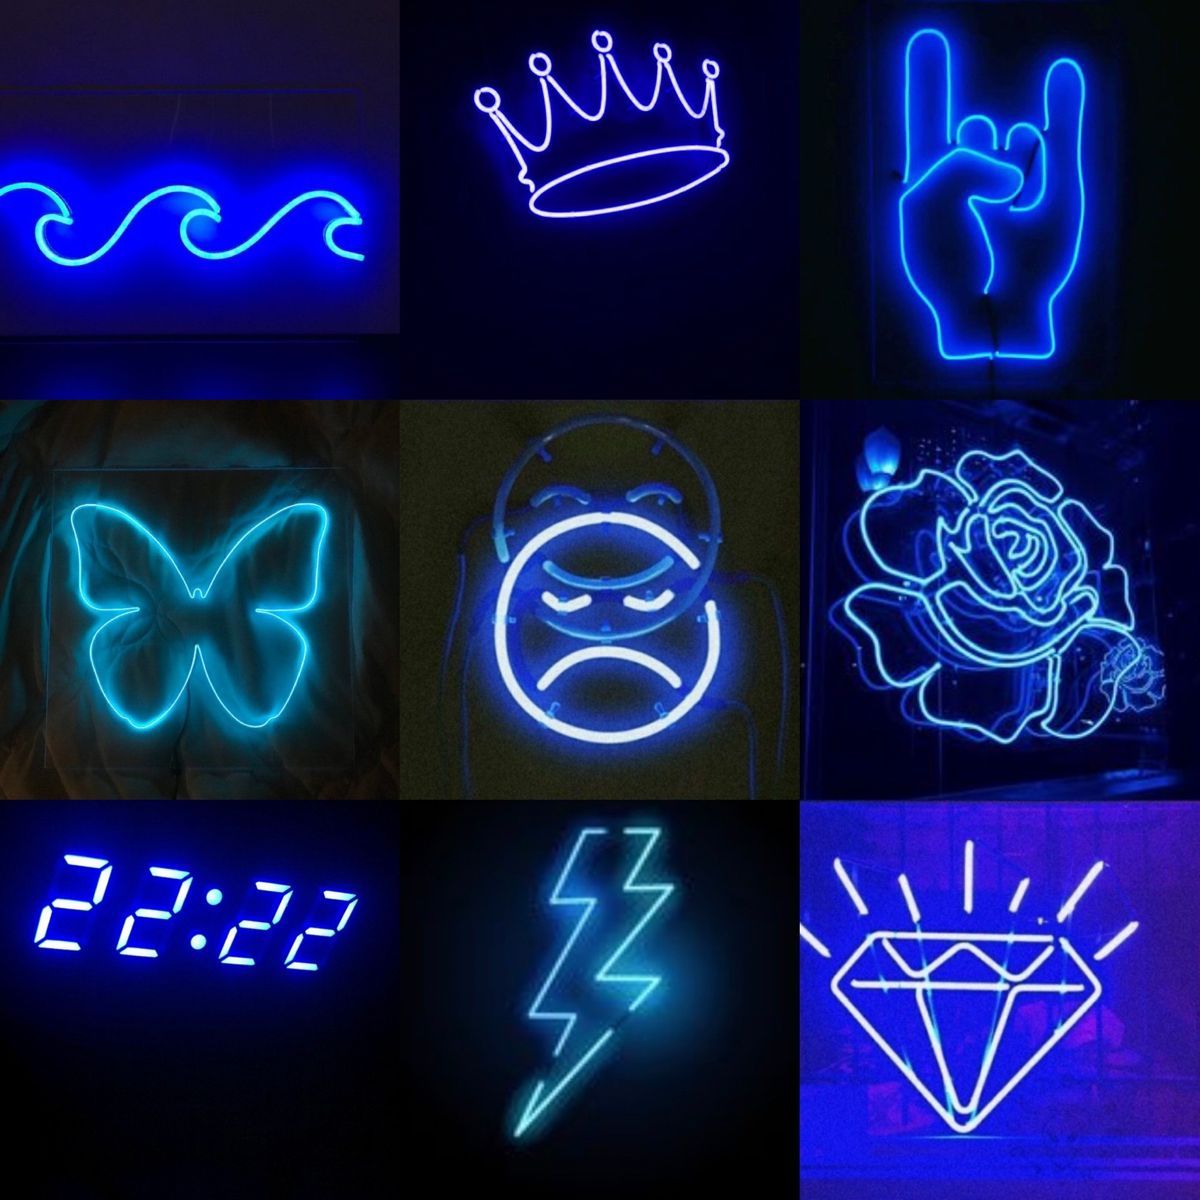 A collage of neon signs with different designs - Neon, neon blue, dark blue, navy blue